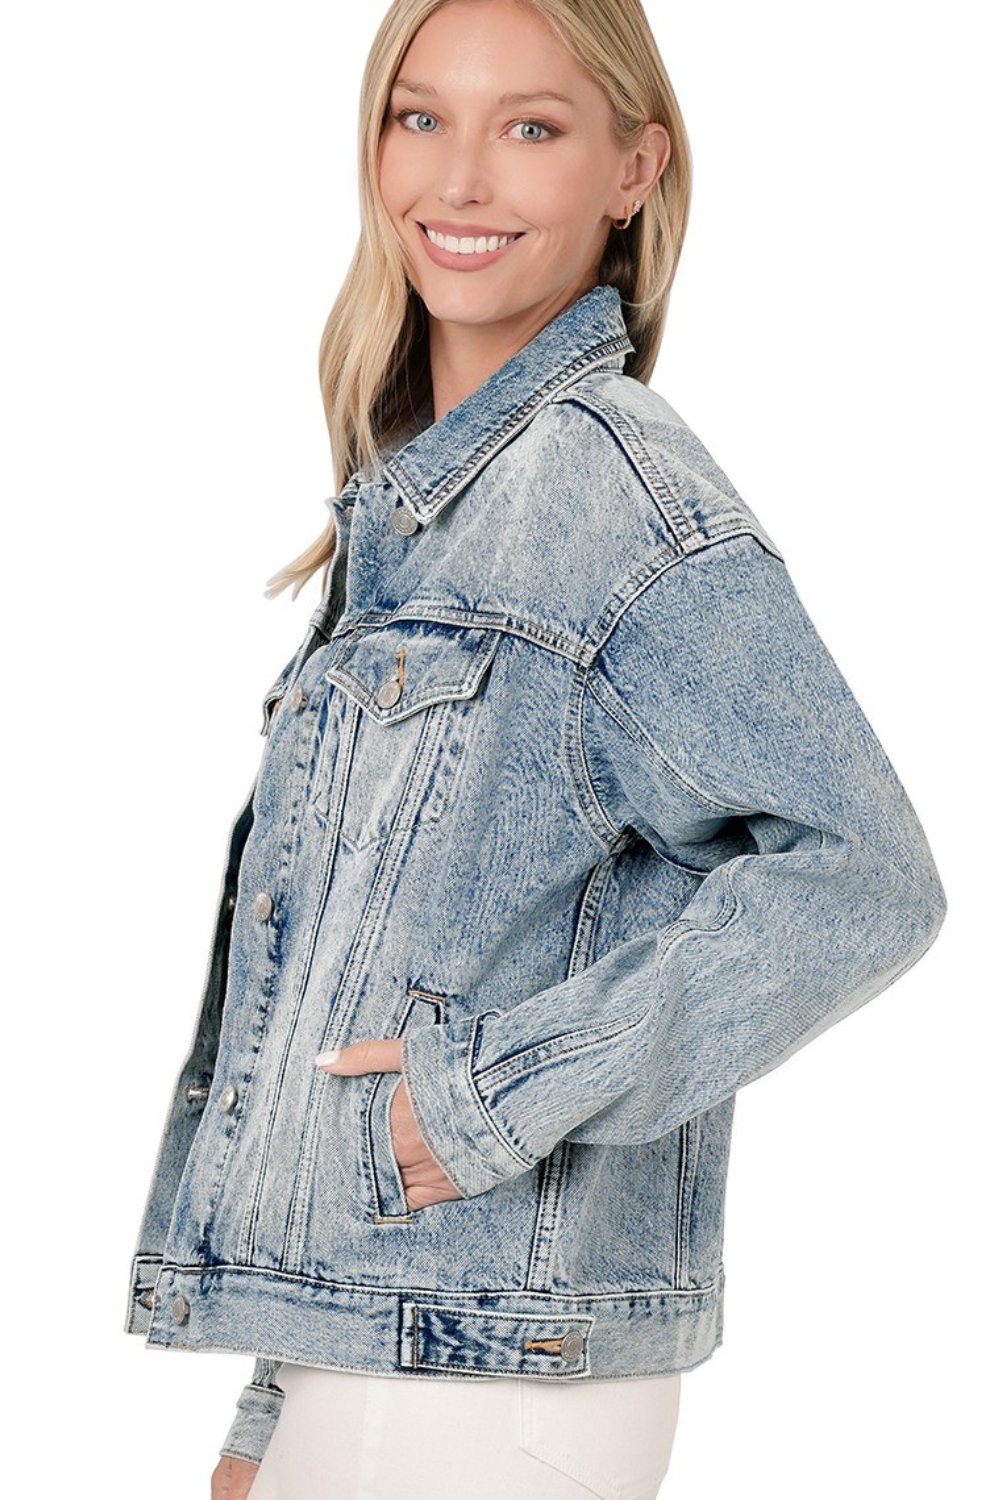 Dearly Threaded Denim + Thread 100% Cotton Women's Light Washed Relaxed Fit Denim Jacket 2x